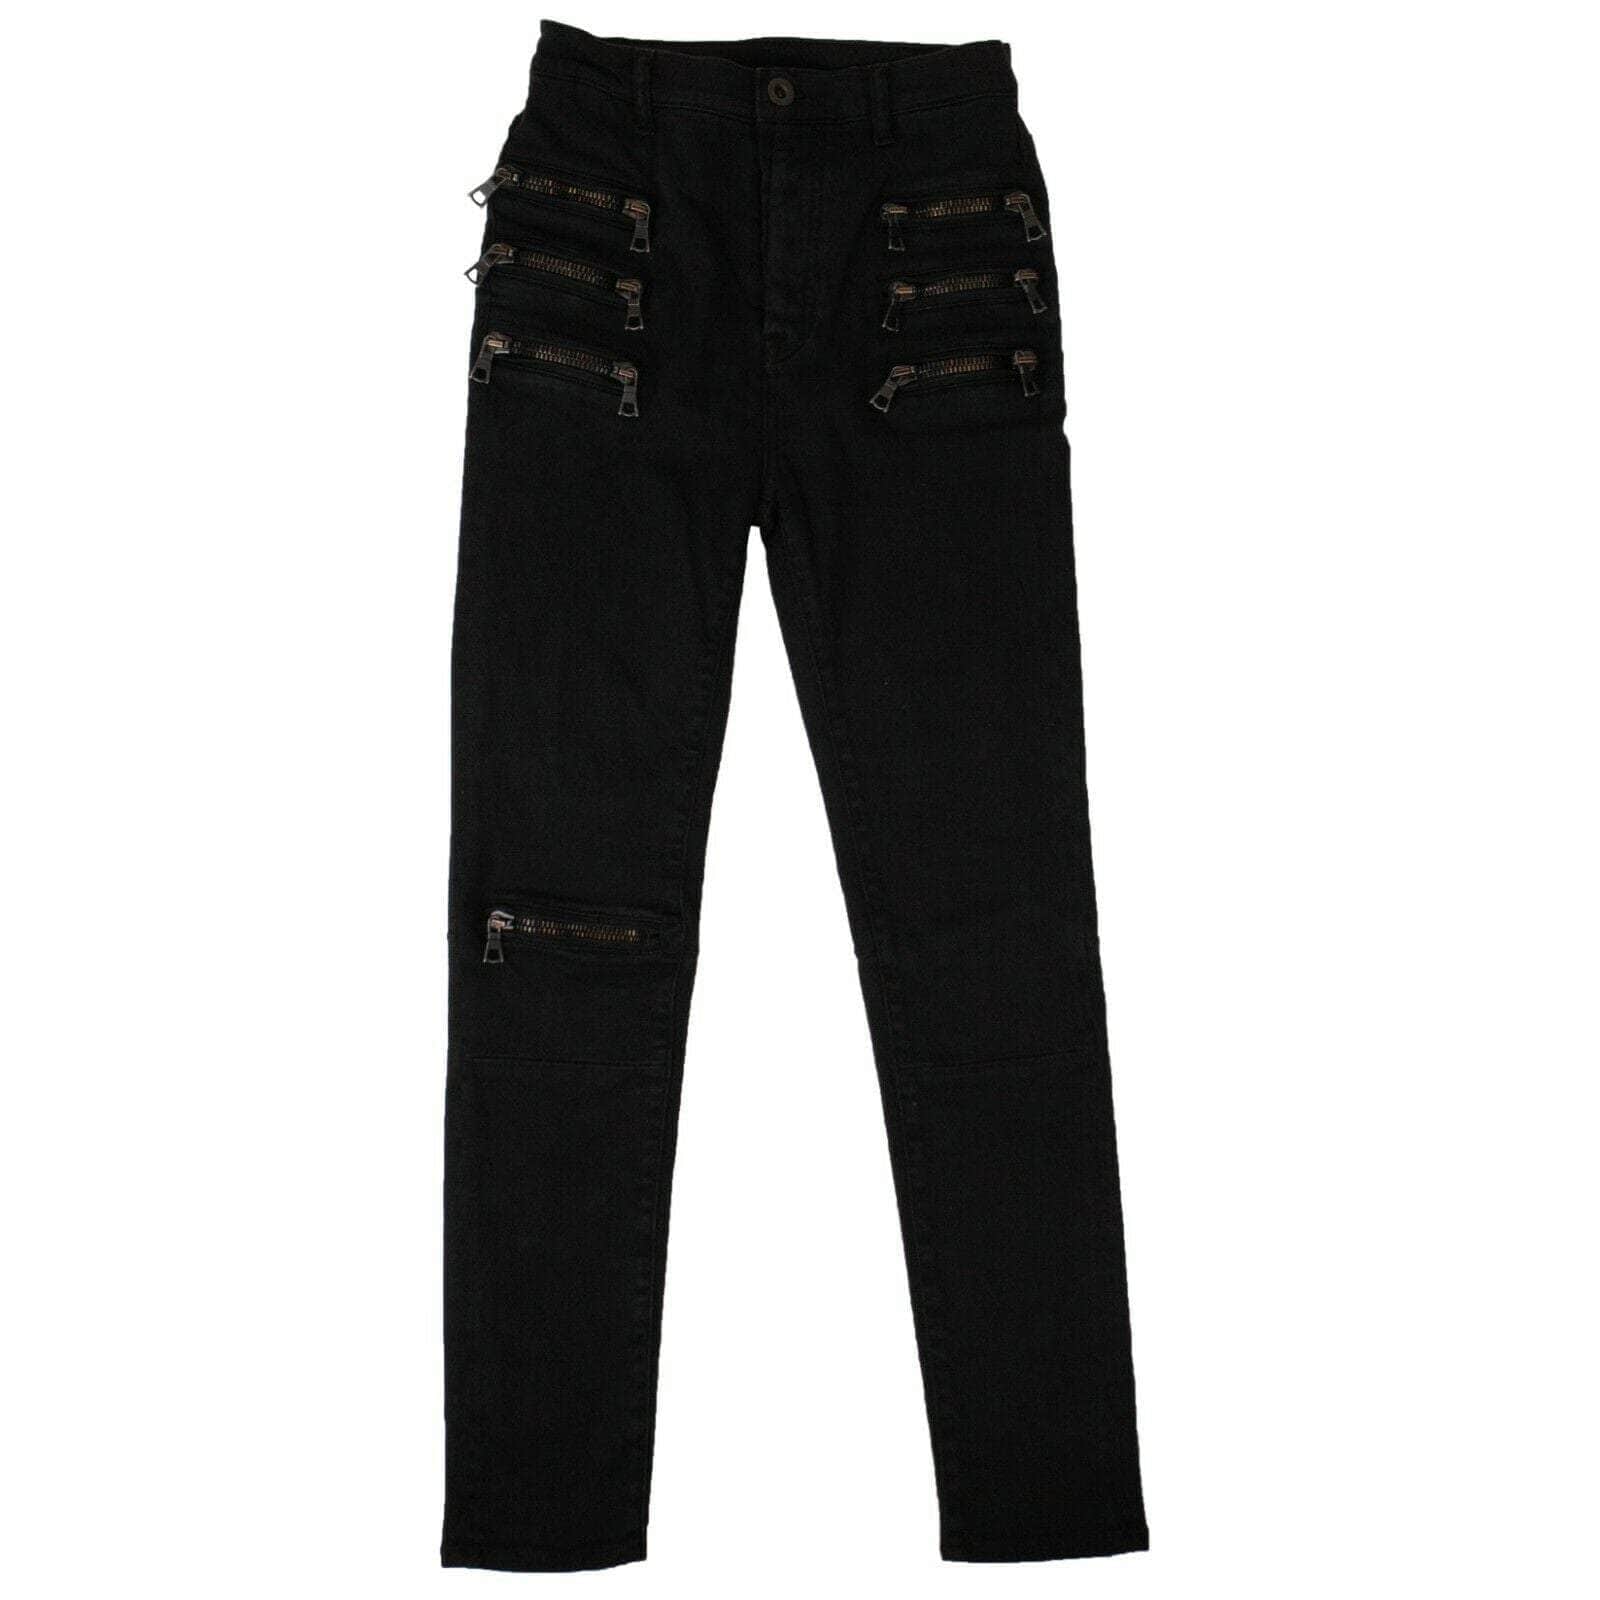 Unravel Project 250-500, channelenable-all, chicmi, couponcollection, gender-womens, main-clothing, size-26-us, unravel-project, womens-skinny-jeans 26 US Black Multi Zip Skinny Jeans 82NGG-UN-1200/26 82NGG-UN-1200/26